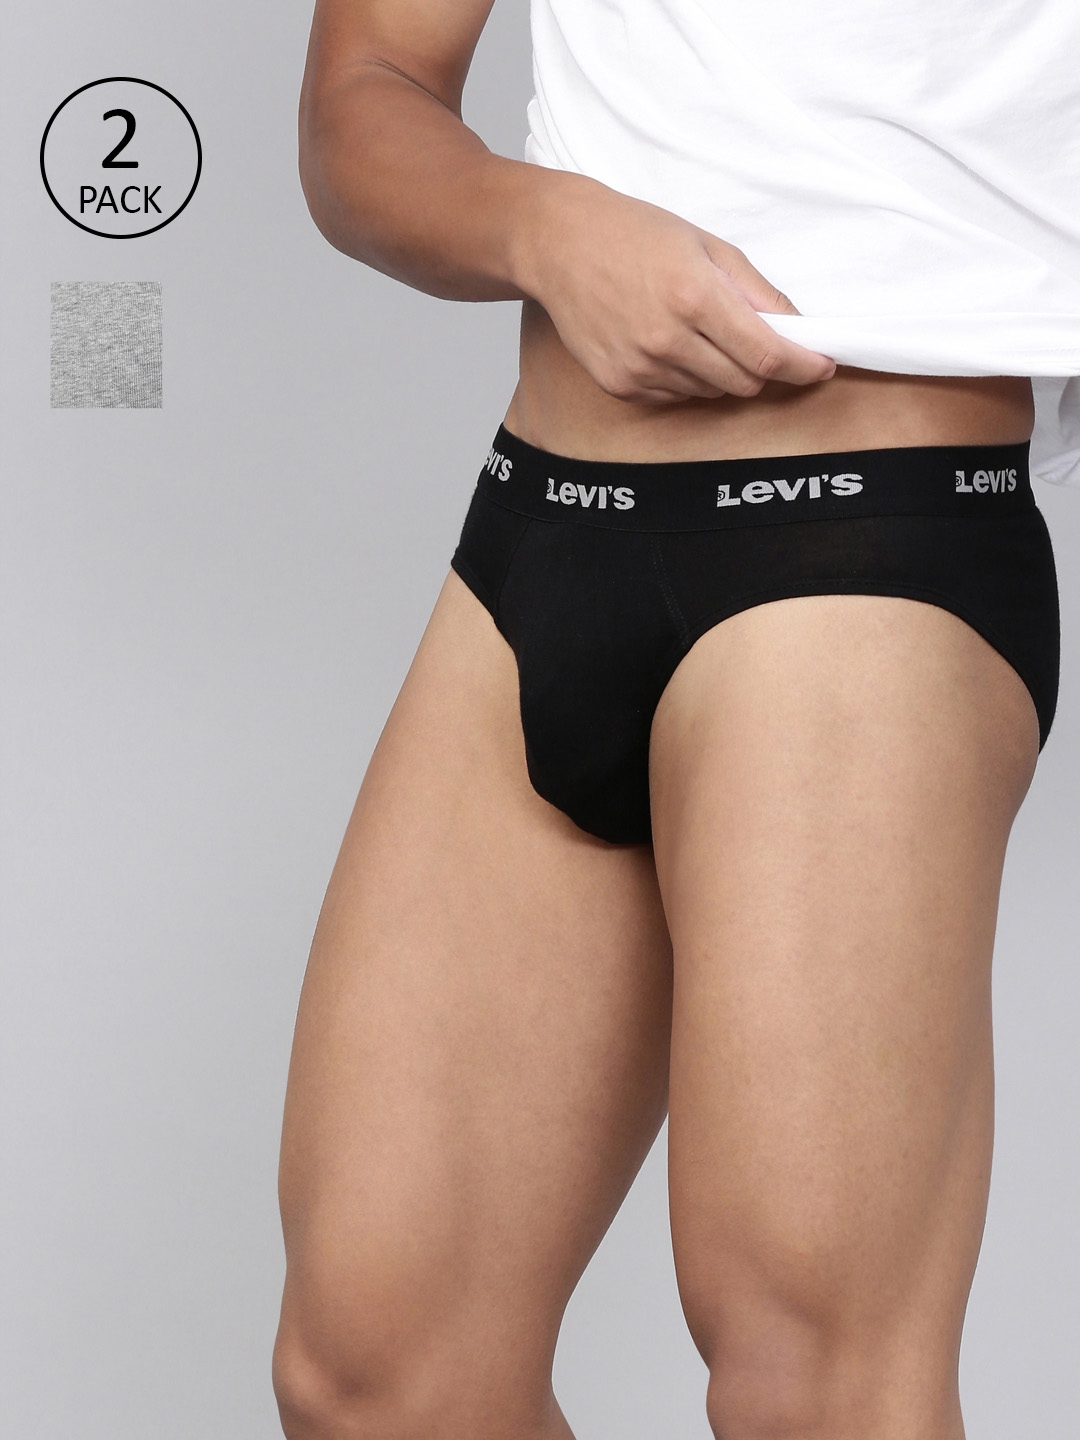 Buy Levis Pack Of 2 Smartskin Technology Neo Briefs With Tag Free Comfort  #009 - Briefs for Men 9262607